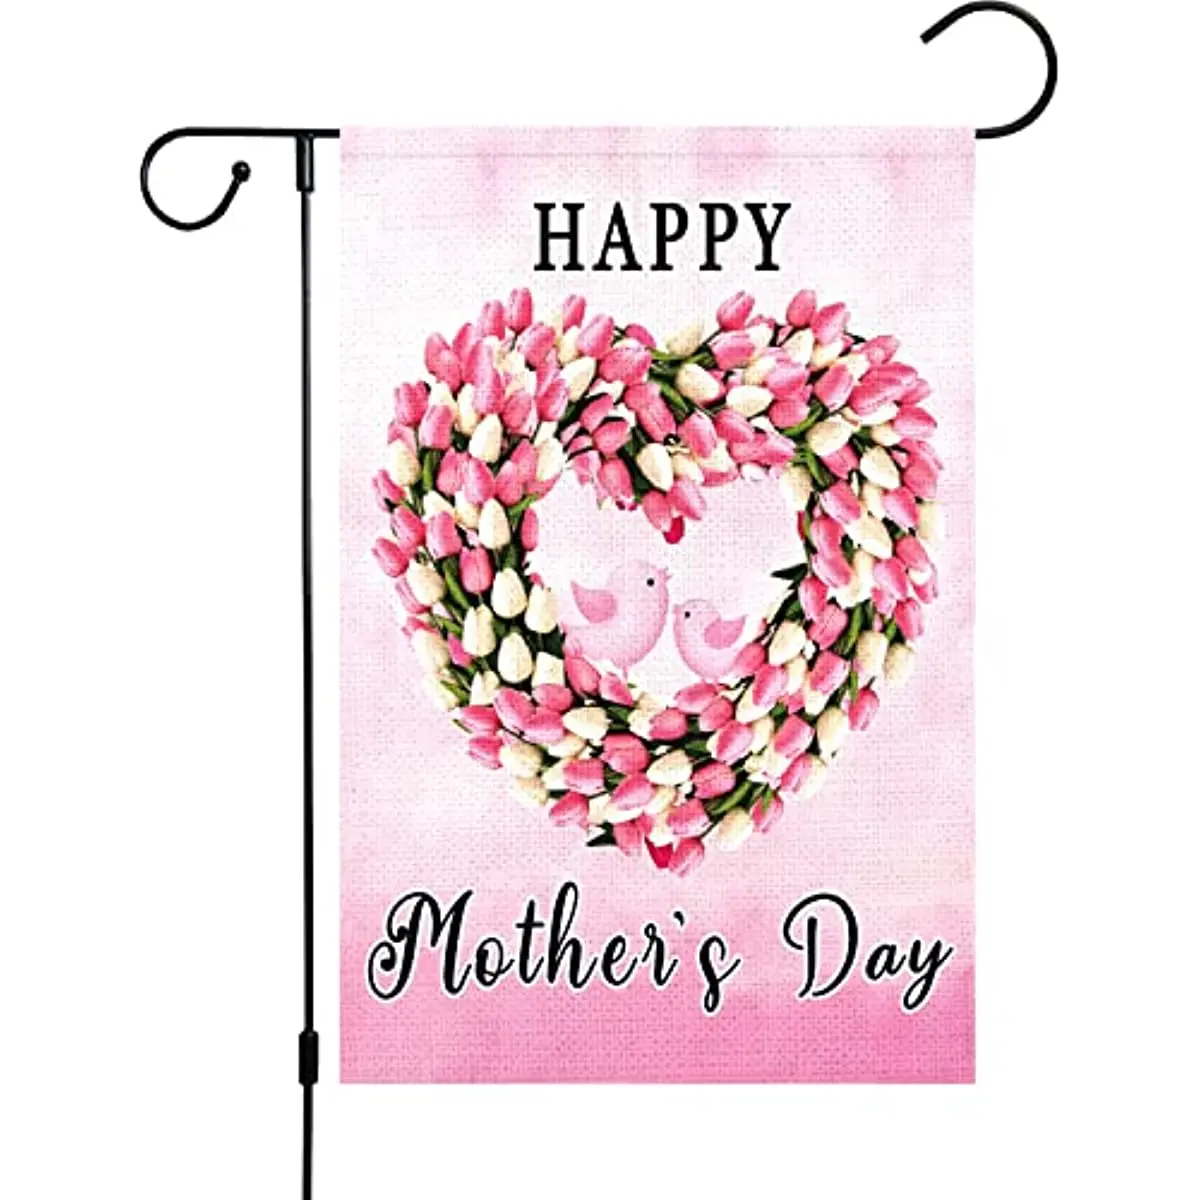 

Happy Mothers Day Garden Flag 12x18 Double Sided for Mom Pink Burlap Small Welcome Floral Flower Garden Yard Flags for Spring